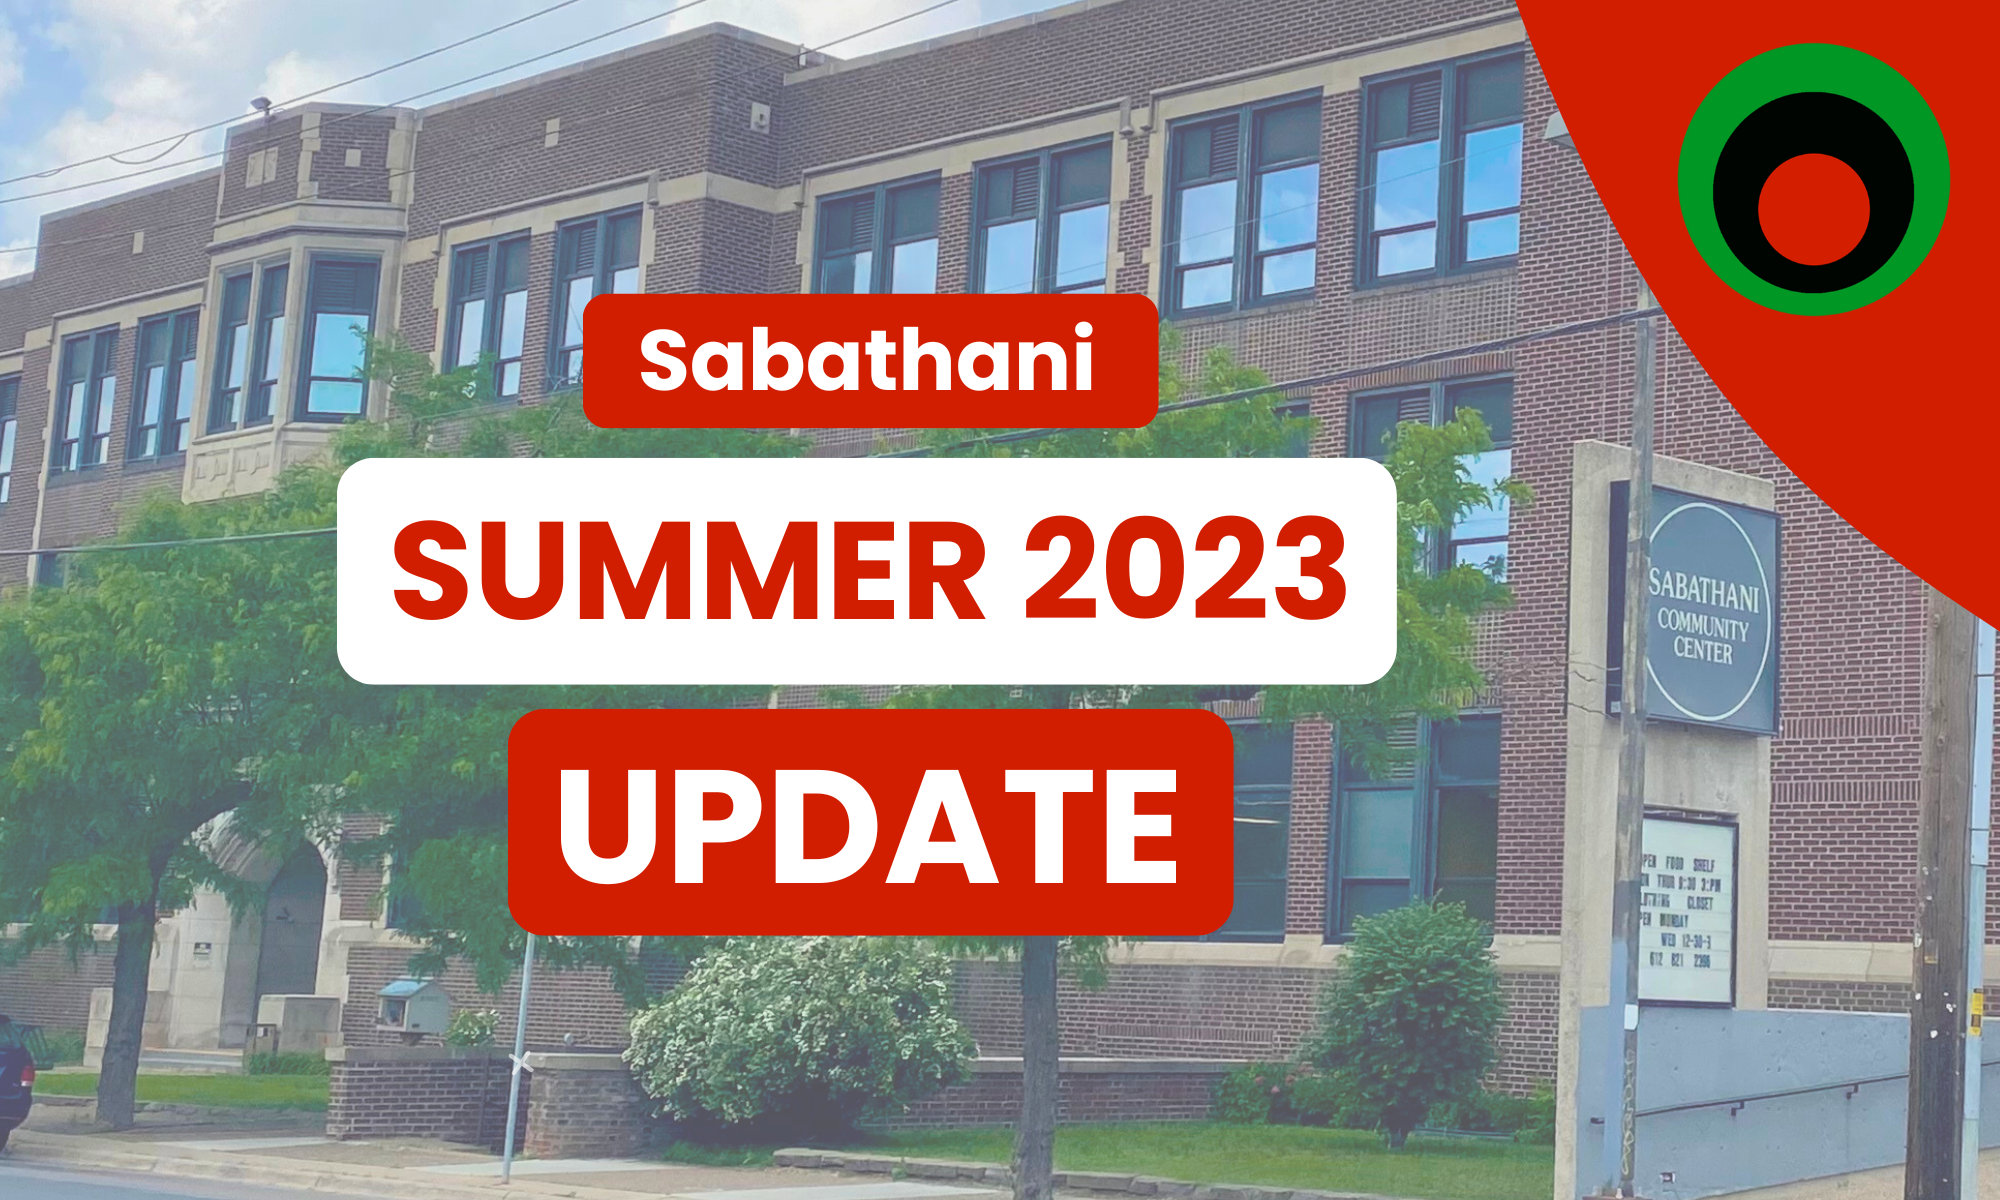 Updates from Sabathani: CEO Redd’s Summer 2023 Message